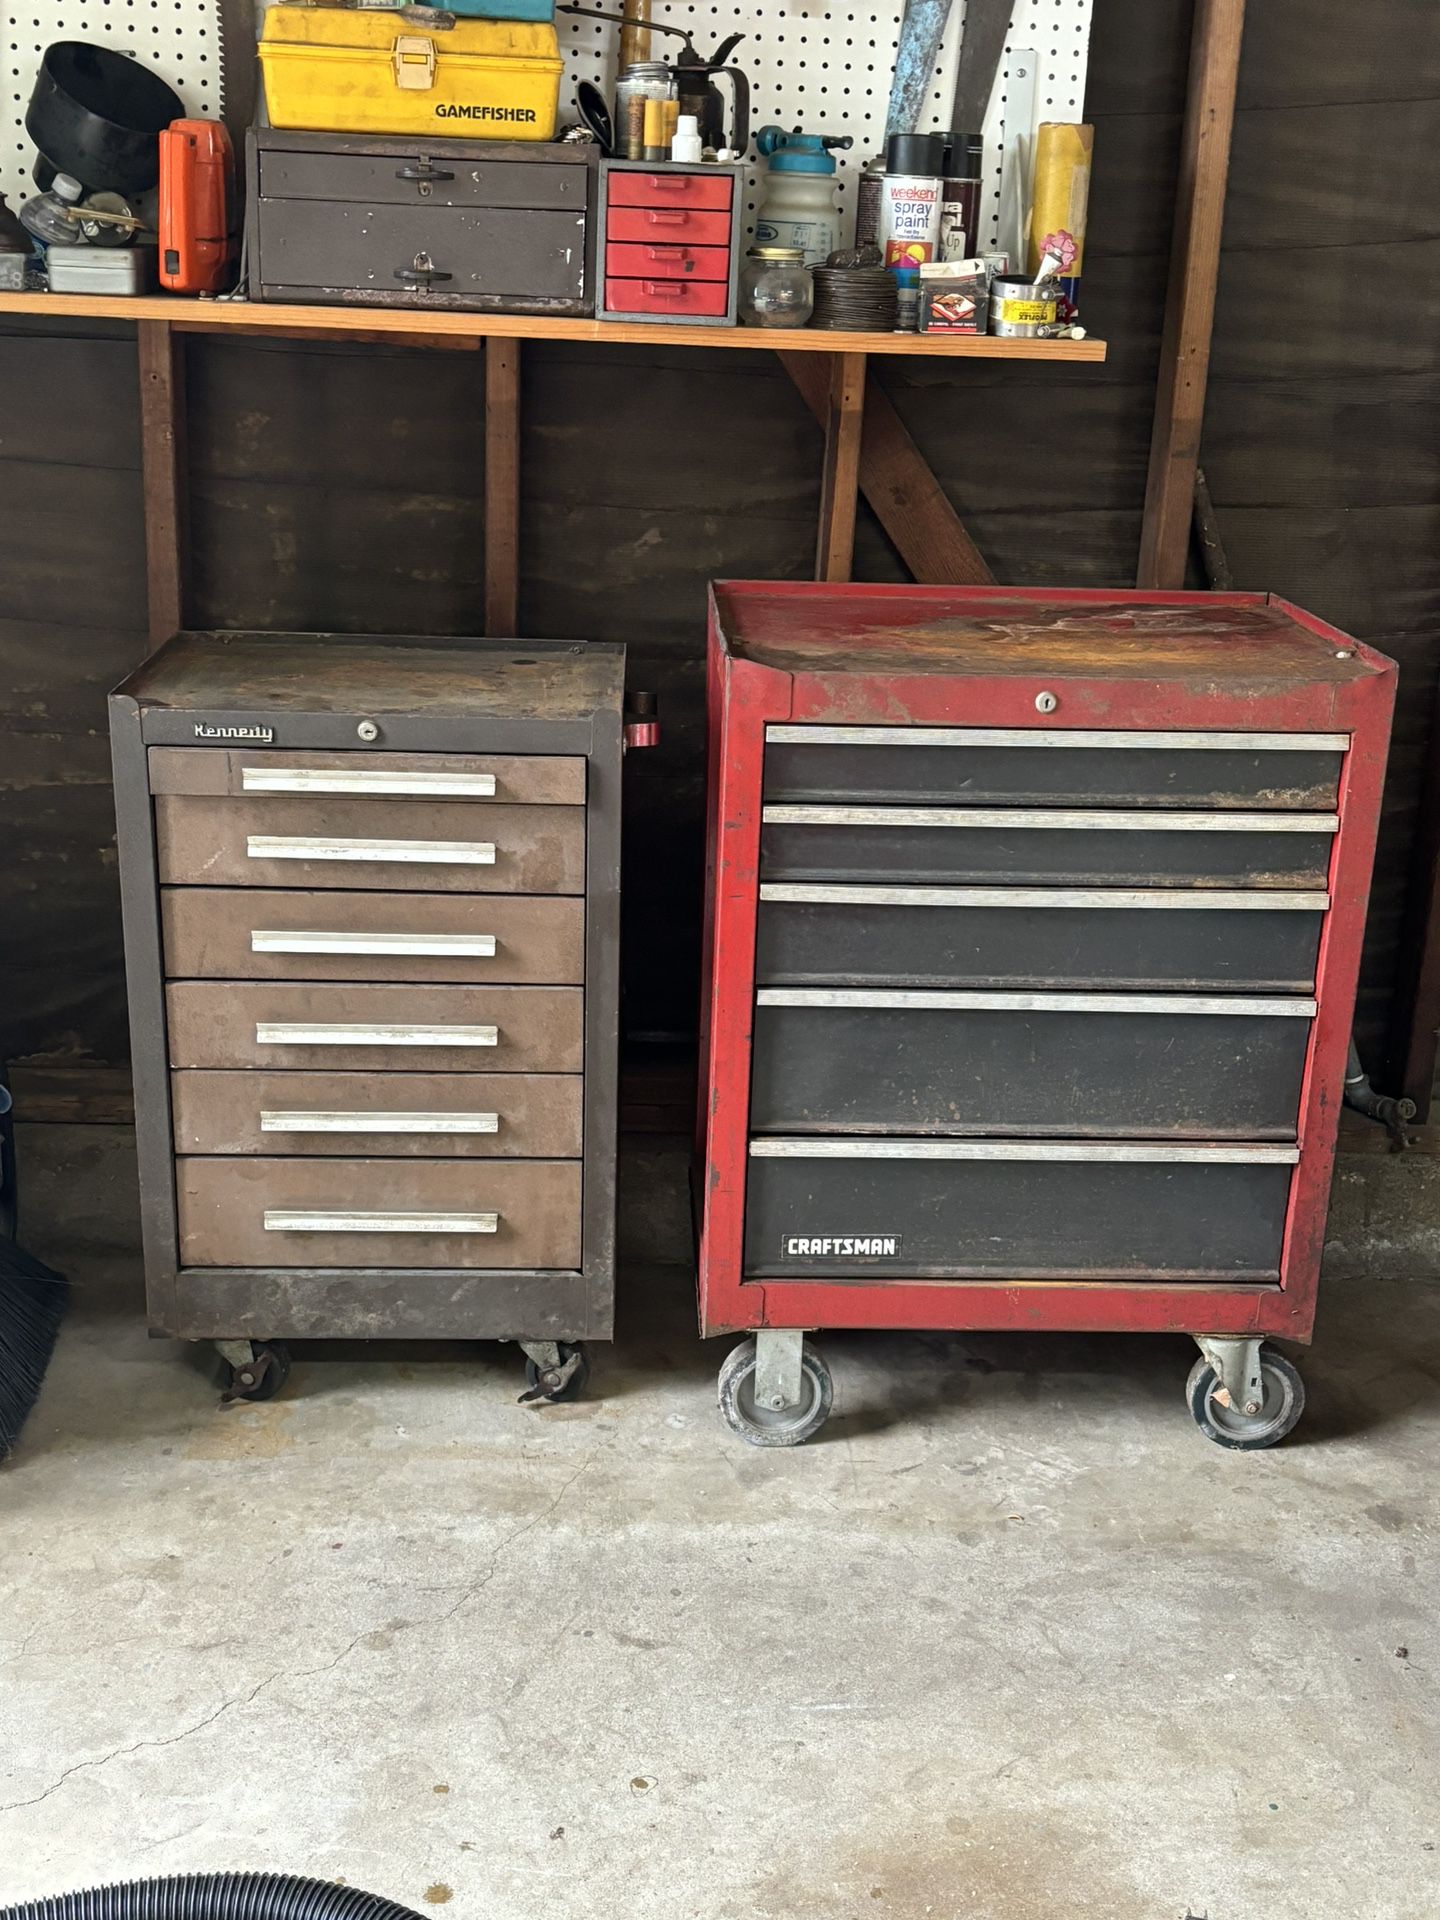 Selling As A Pair - Rolling Tool Boxes $100